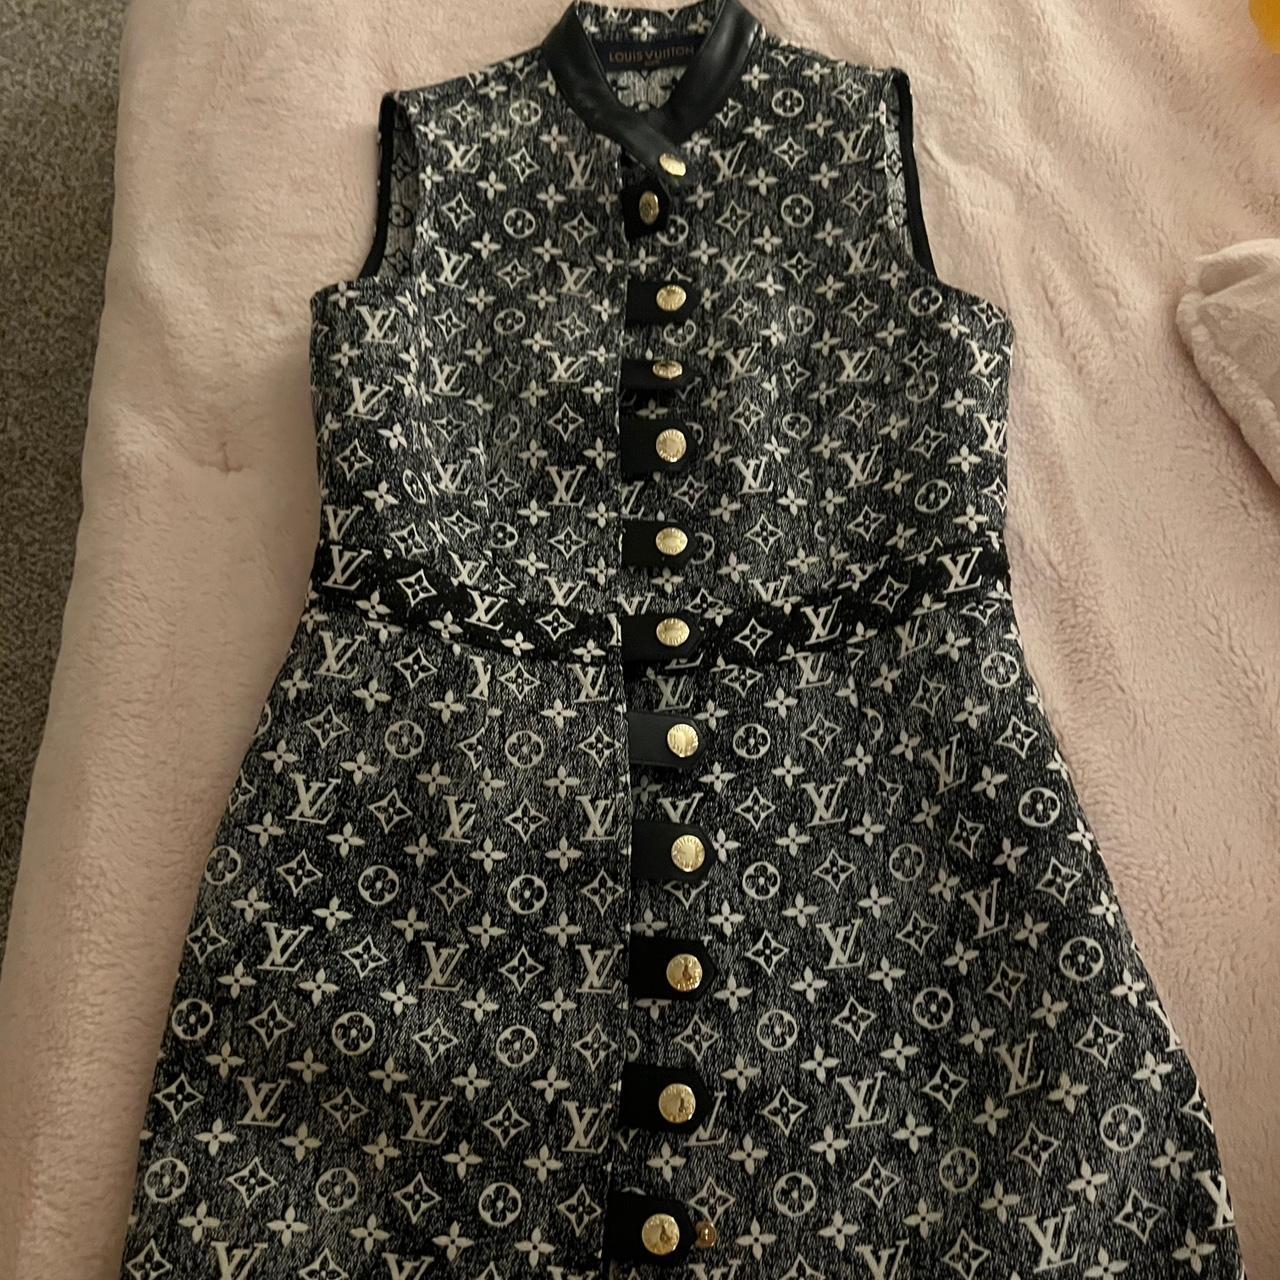 Louis Vuitton Black Dress purchased from LV Boutique - Depop